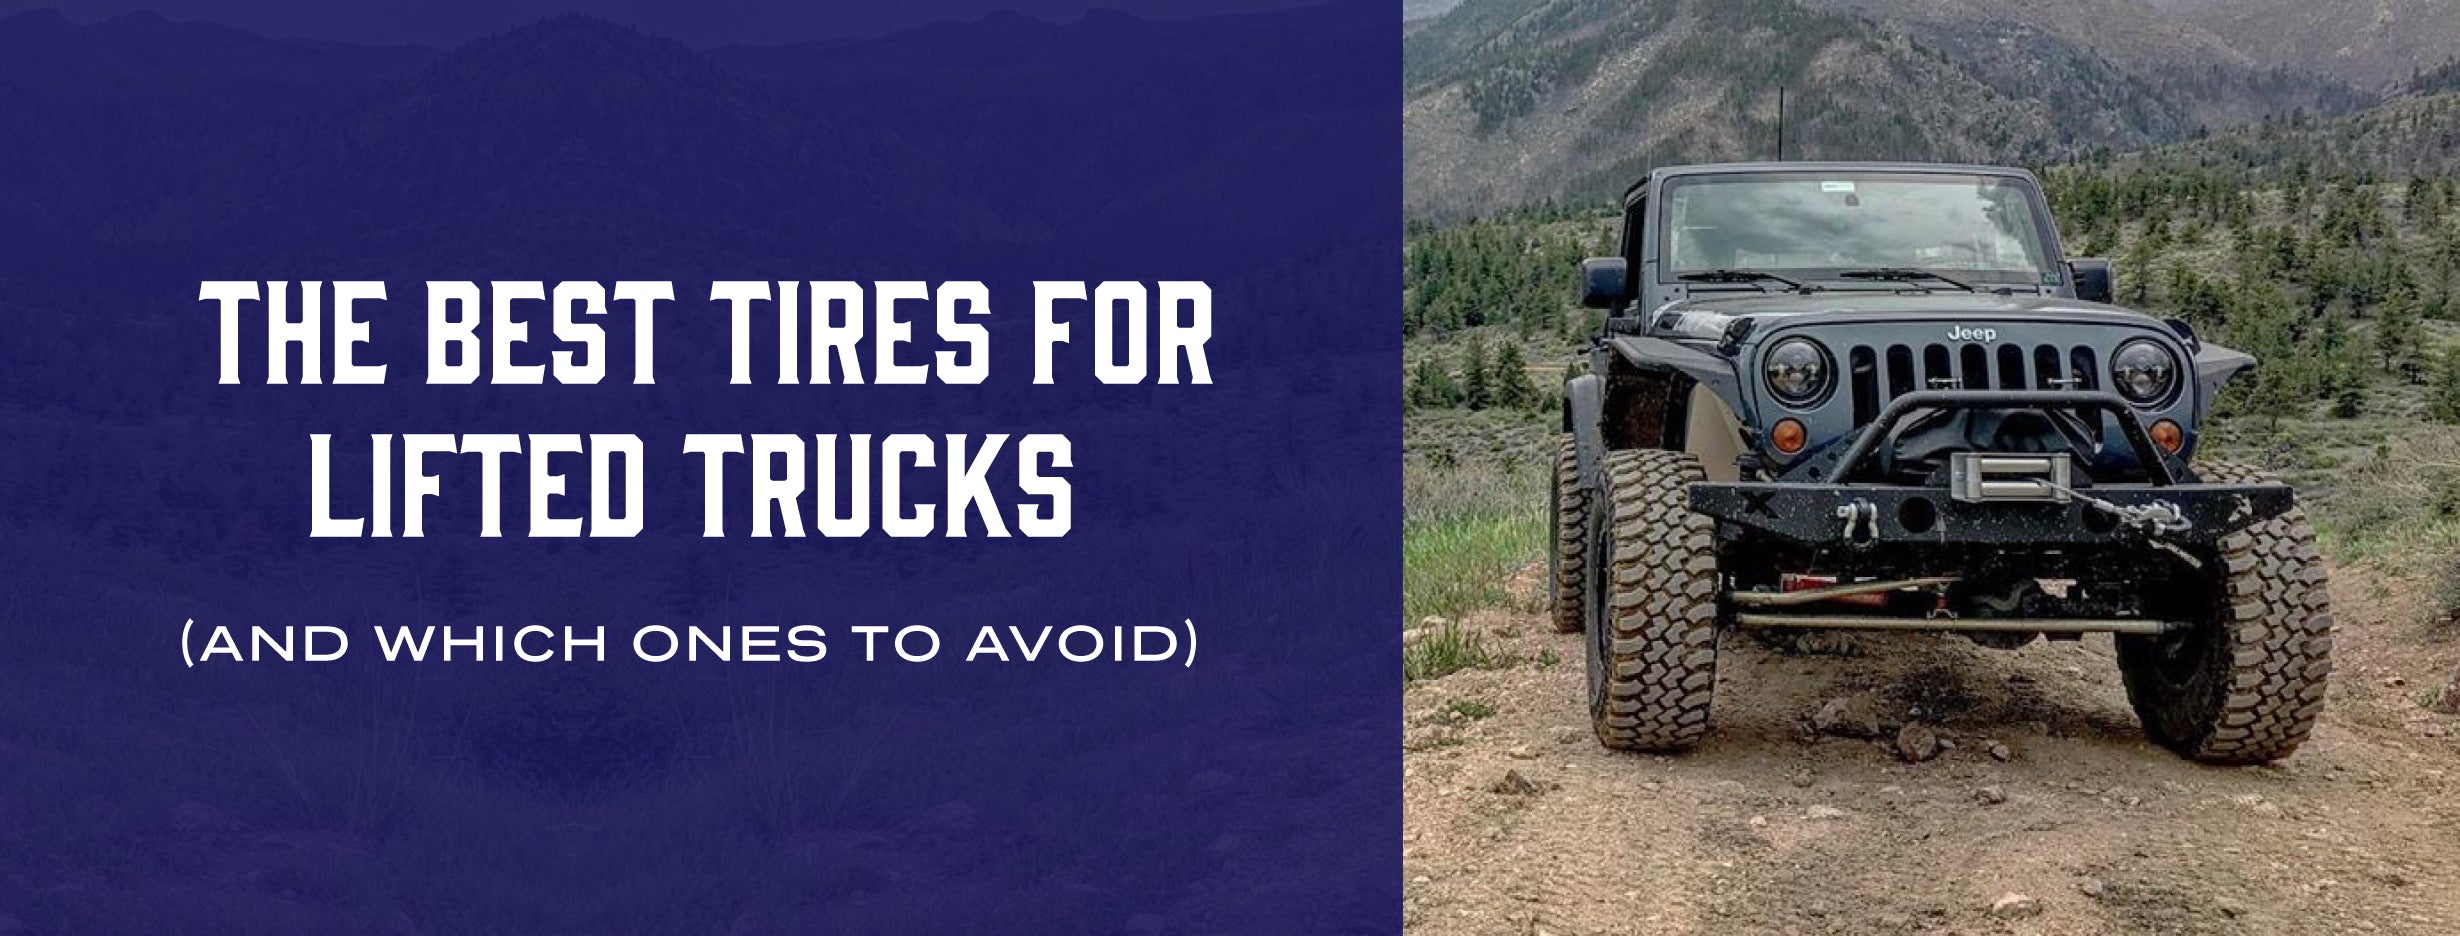 Best Tires For Lifted Trucks